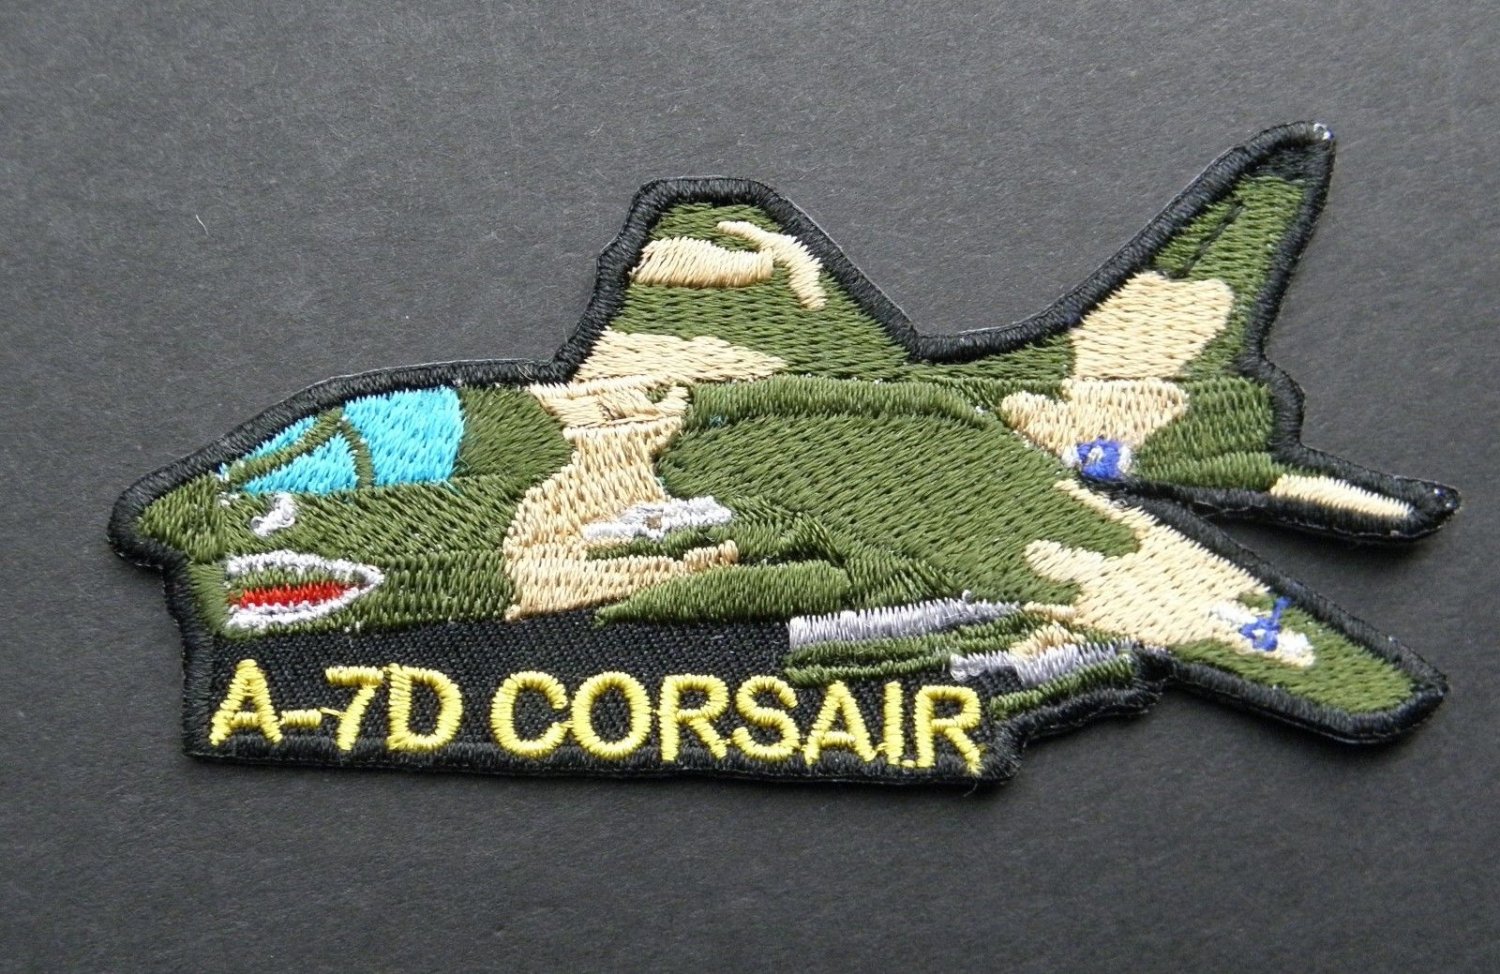 Corsair A-7D Fighter Aircraft Embroidered Patch 4 Inches